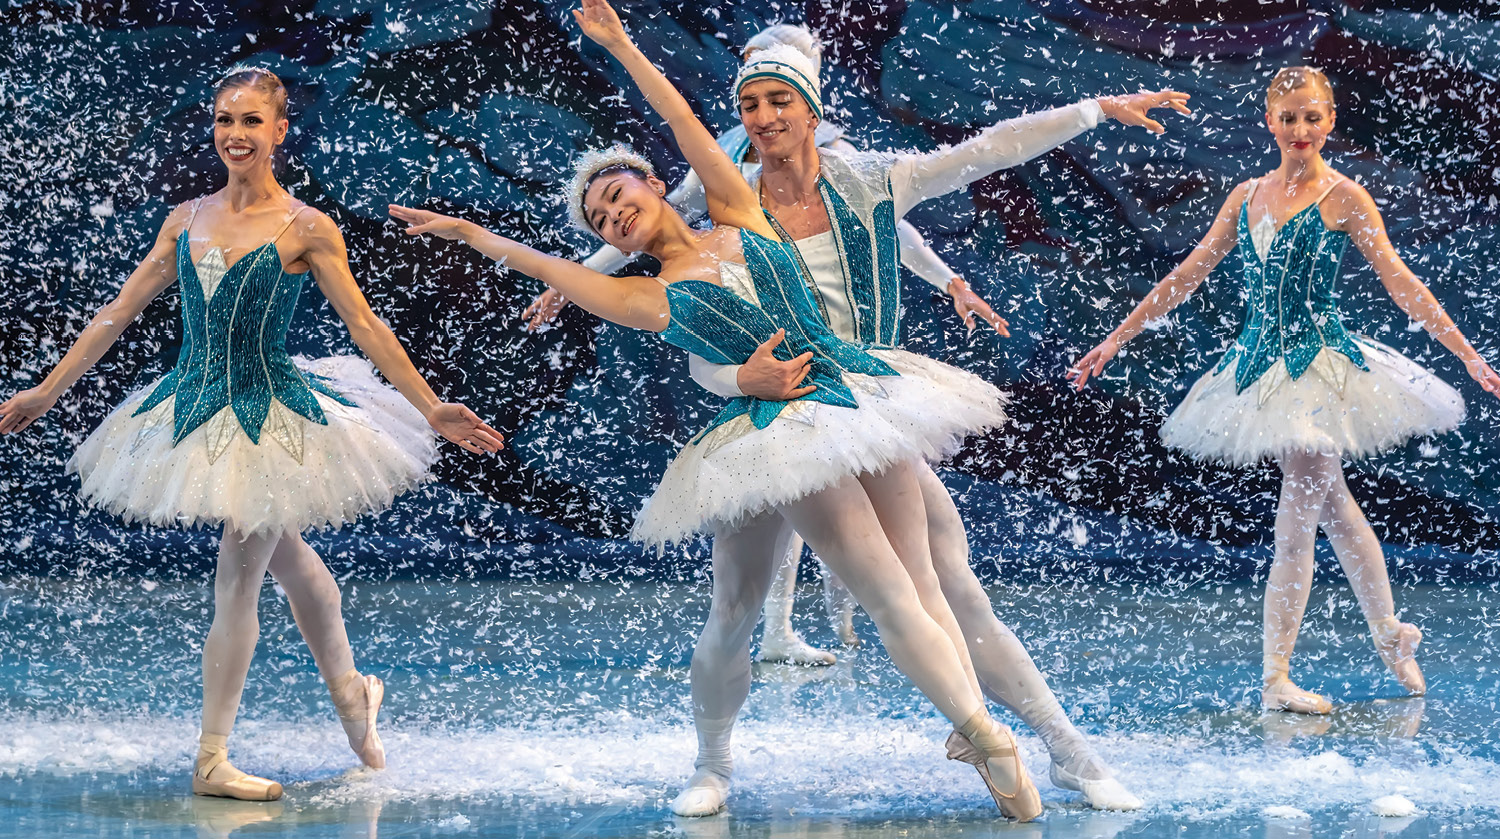 Image of dancers from Canada’s Jörgen Ballet performing in The Nutcracker. There are three ballerinas and two male ballet dancers dressed in blue, silver and white costumes dancing while faux snow falls around them. 